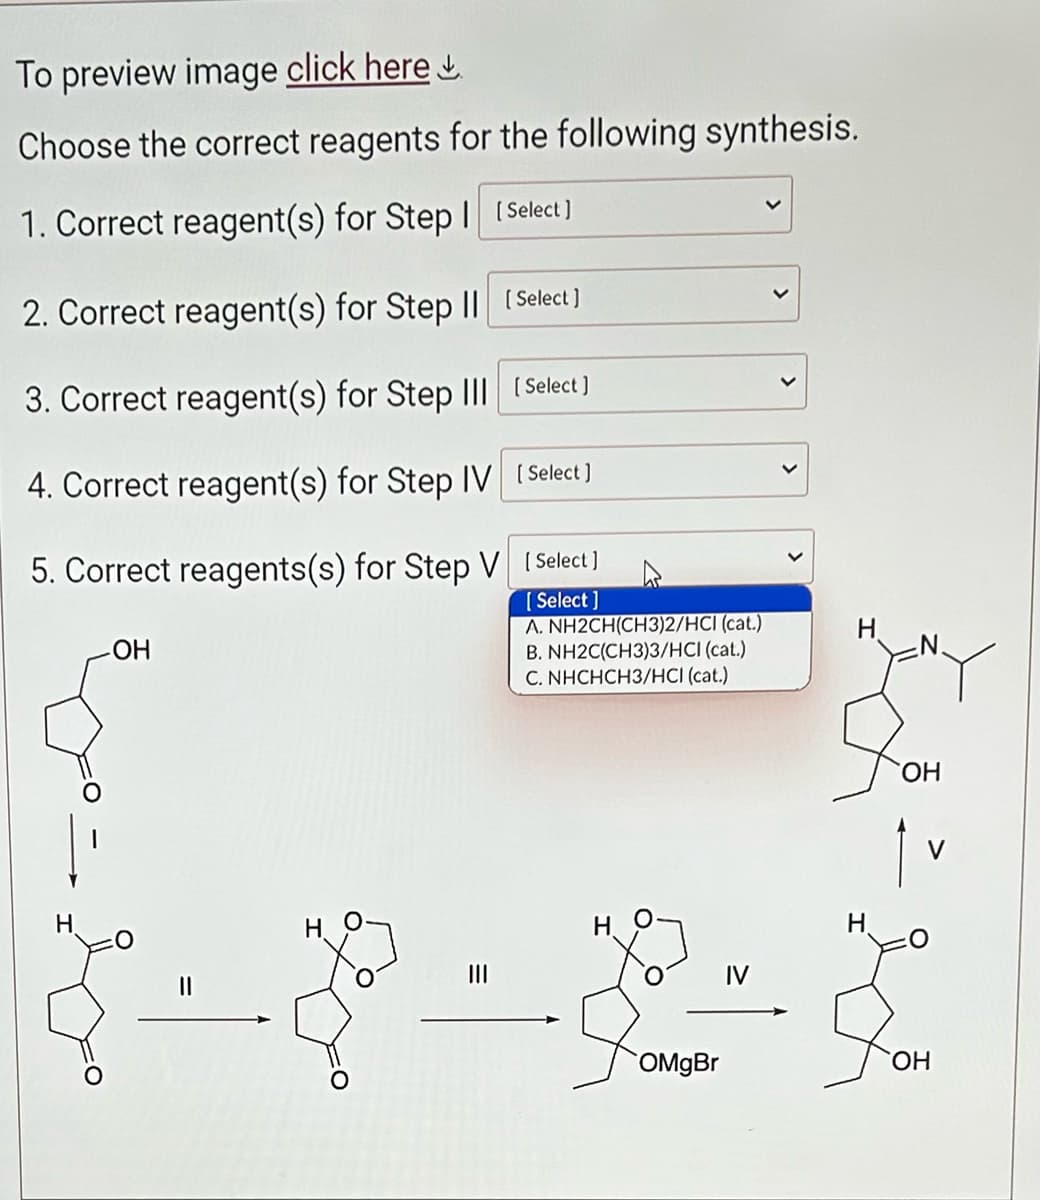 To preview image click here
Choose the correct reagents for the following synthesis.
1. Correct reagent(s) for Step | [Select ]
2. Correct reagent(s) for Step II
3. Correct reagent(s) for Step III
4. Correct reagent(s) for Step IV
5. Correct reagents(s) for Step V
H
-OH
|||
[Select]
[Select]
[Select]
[Select]
[Select]
A. NH2CH(CH3)2/HCI (cat.)
B. NH2C(CH3)3/HCI (cat.)
C. NHCHCH3/HCI (cat.)
H
OMgBr
H
Y
OH
OH